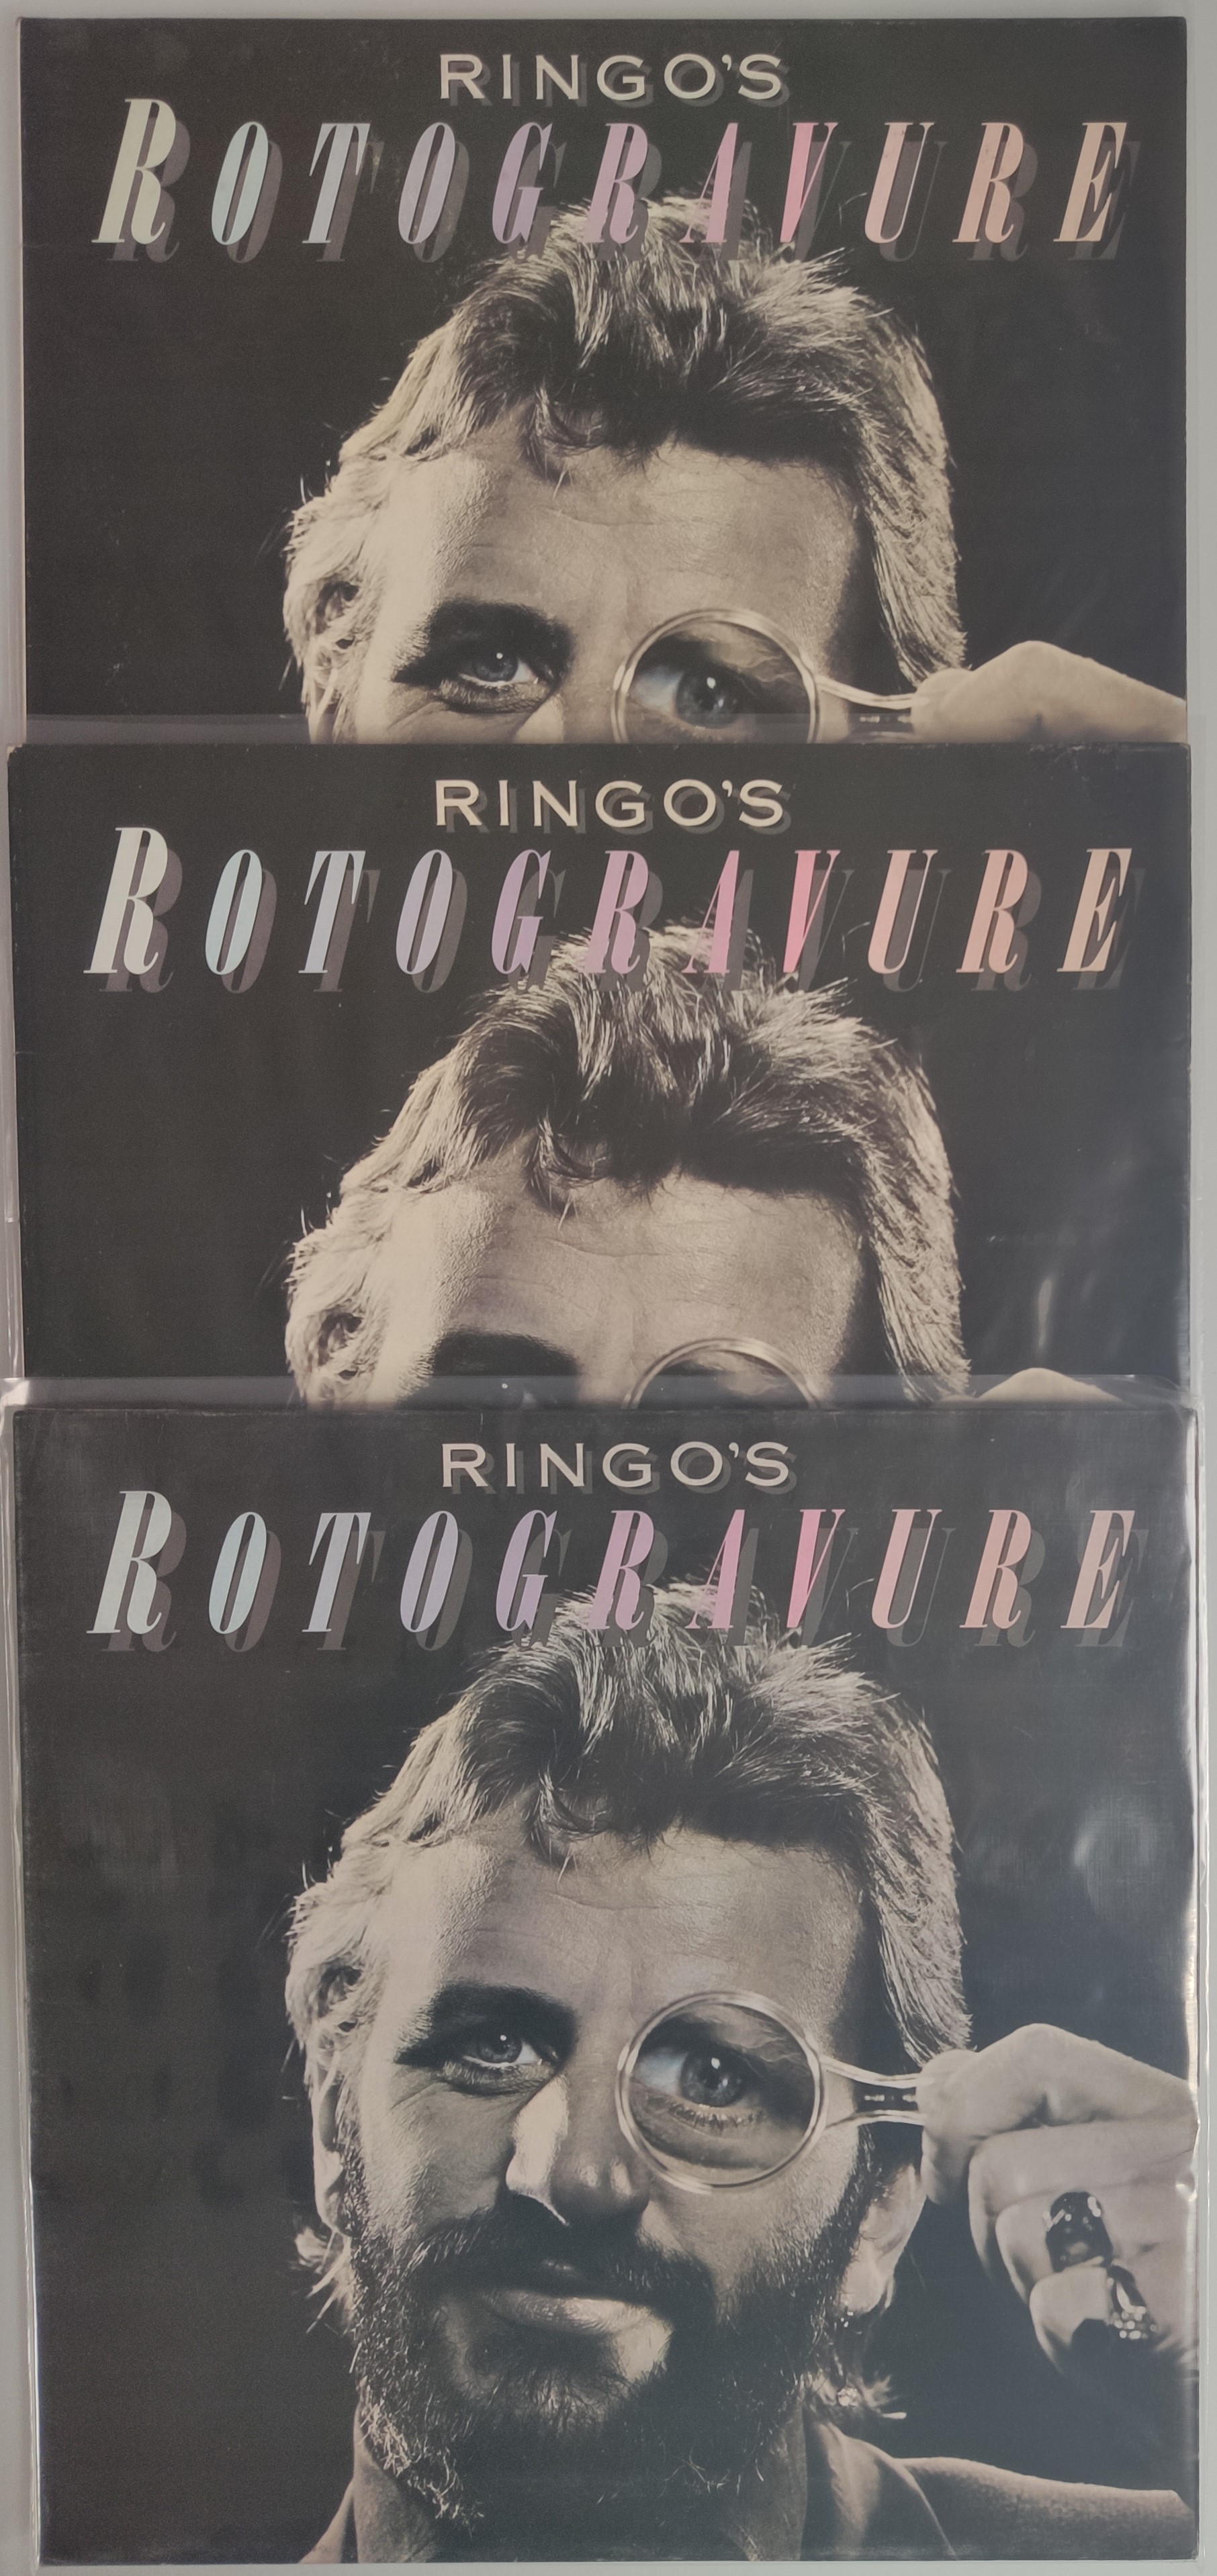 A Collection of 3 x Ringo Starr – Rotogravure Vinyl LP – 1976 UK Pressing and US First Pressings.